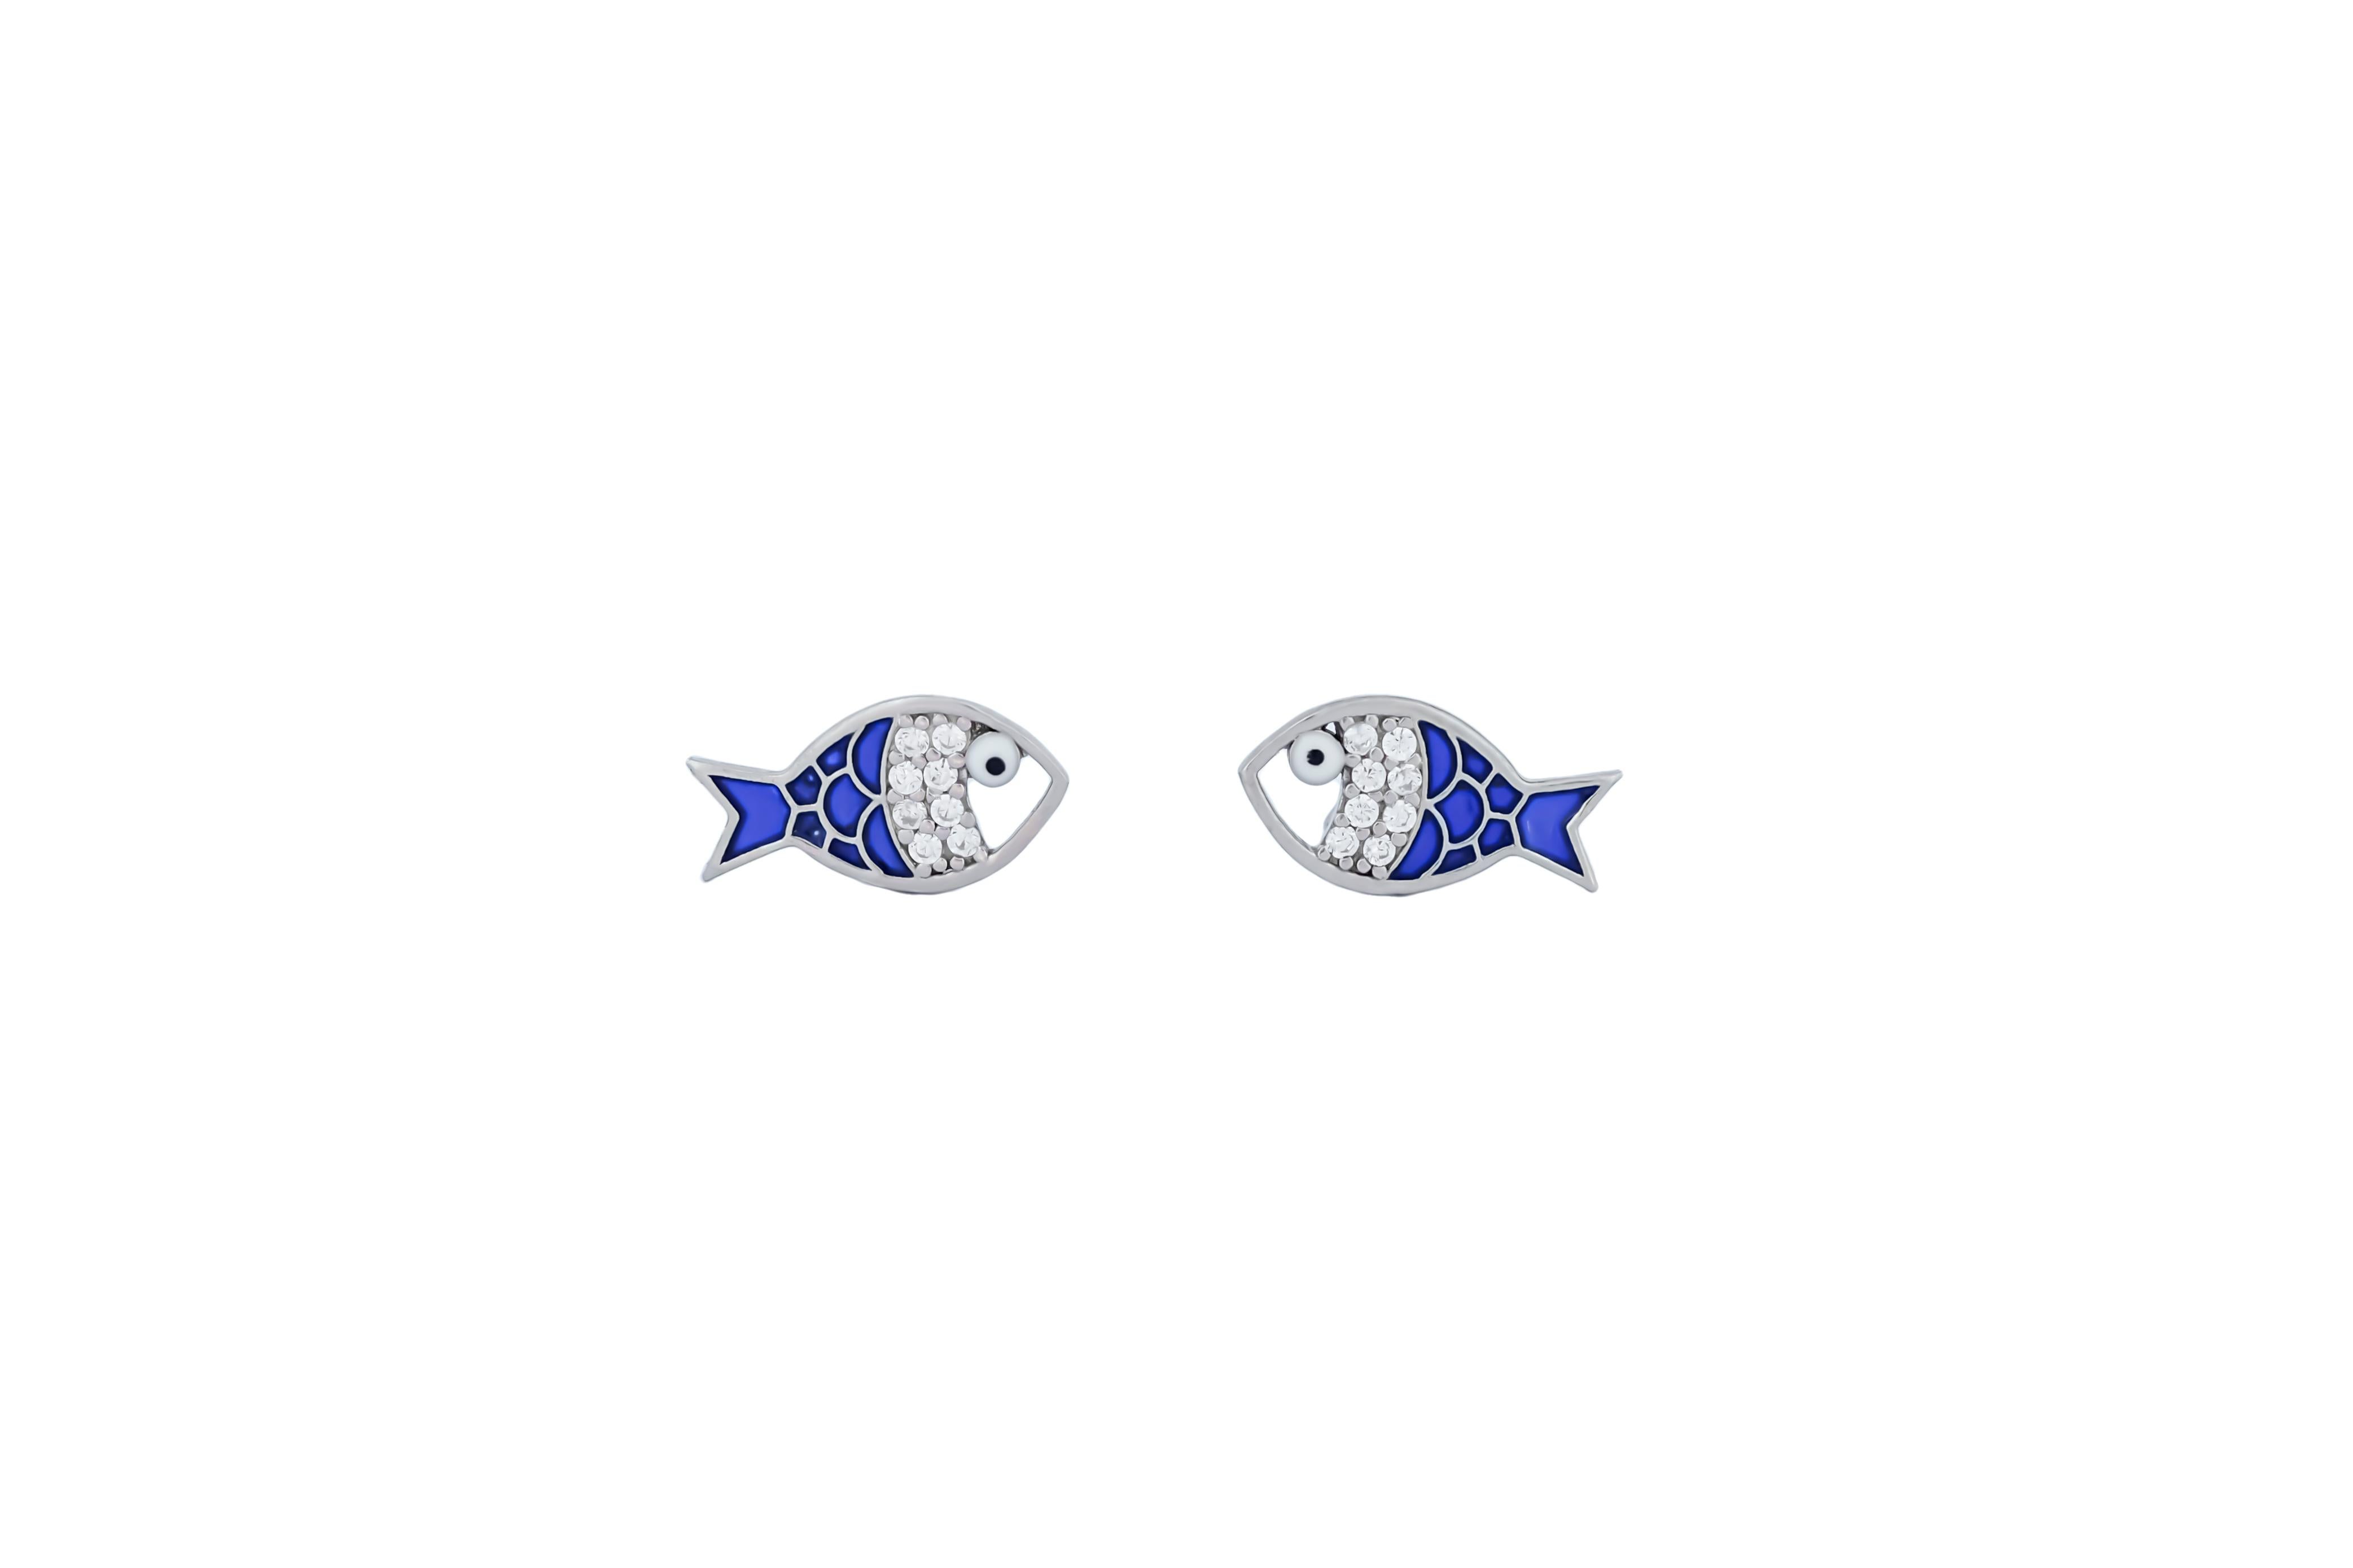 Fish and turtle earrings studs. Animal earrings. Silver earrings studs. 

Metal: silver 925 covered 14k gold

Weight: 3.5 gr  
Turtle earrings size: 12x8 mm
Fish size: 8x4mm
Gemstones:
Turtle: 2 oval opals - natural, colorless topazs 
Fish is